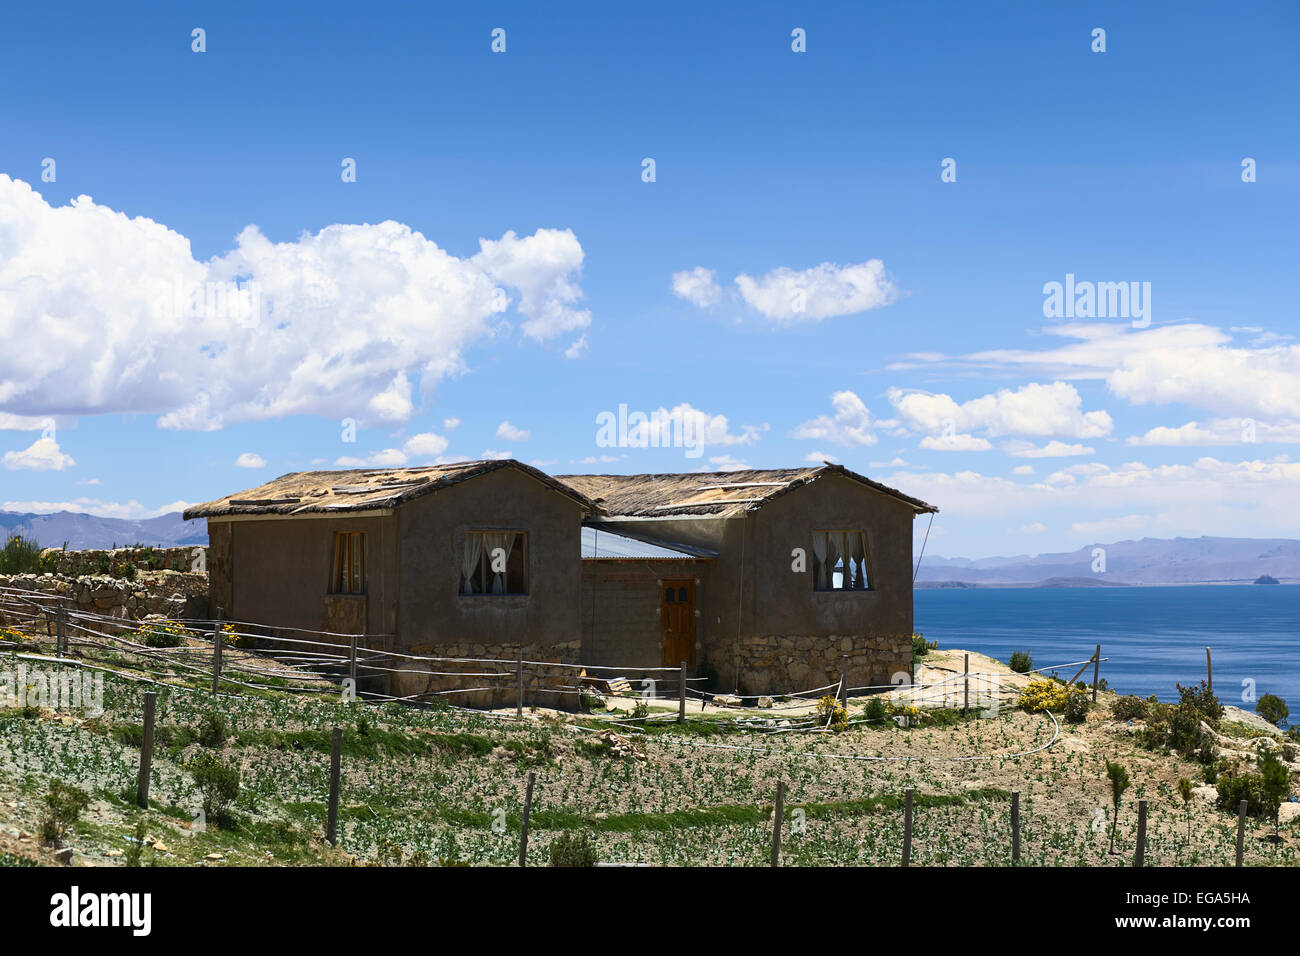 House wih garden standing on hilltop in the southwestern part on Isla del Sol (Island of the Sun) in Lake Titicaca, Bolivia Stock Photo